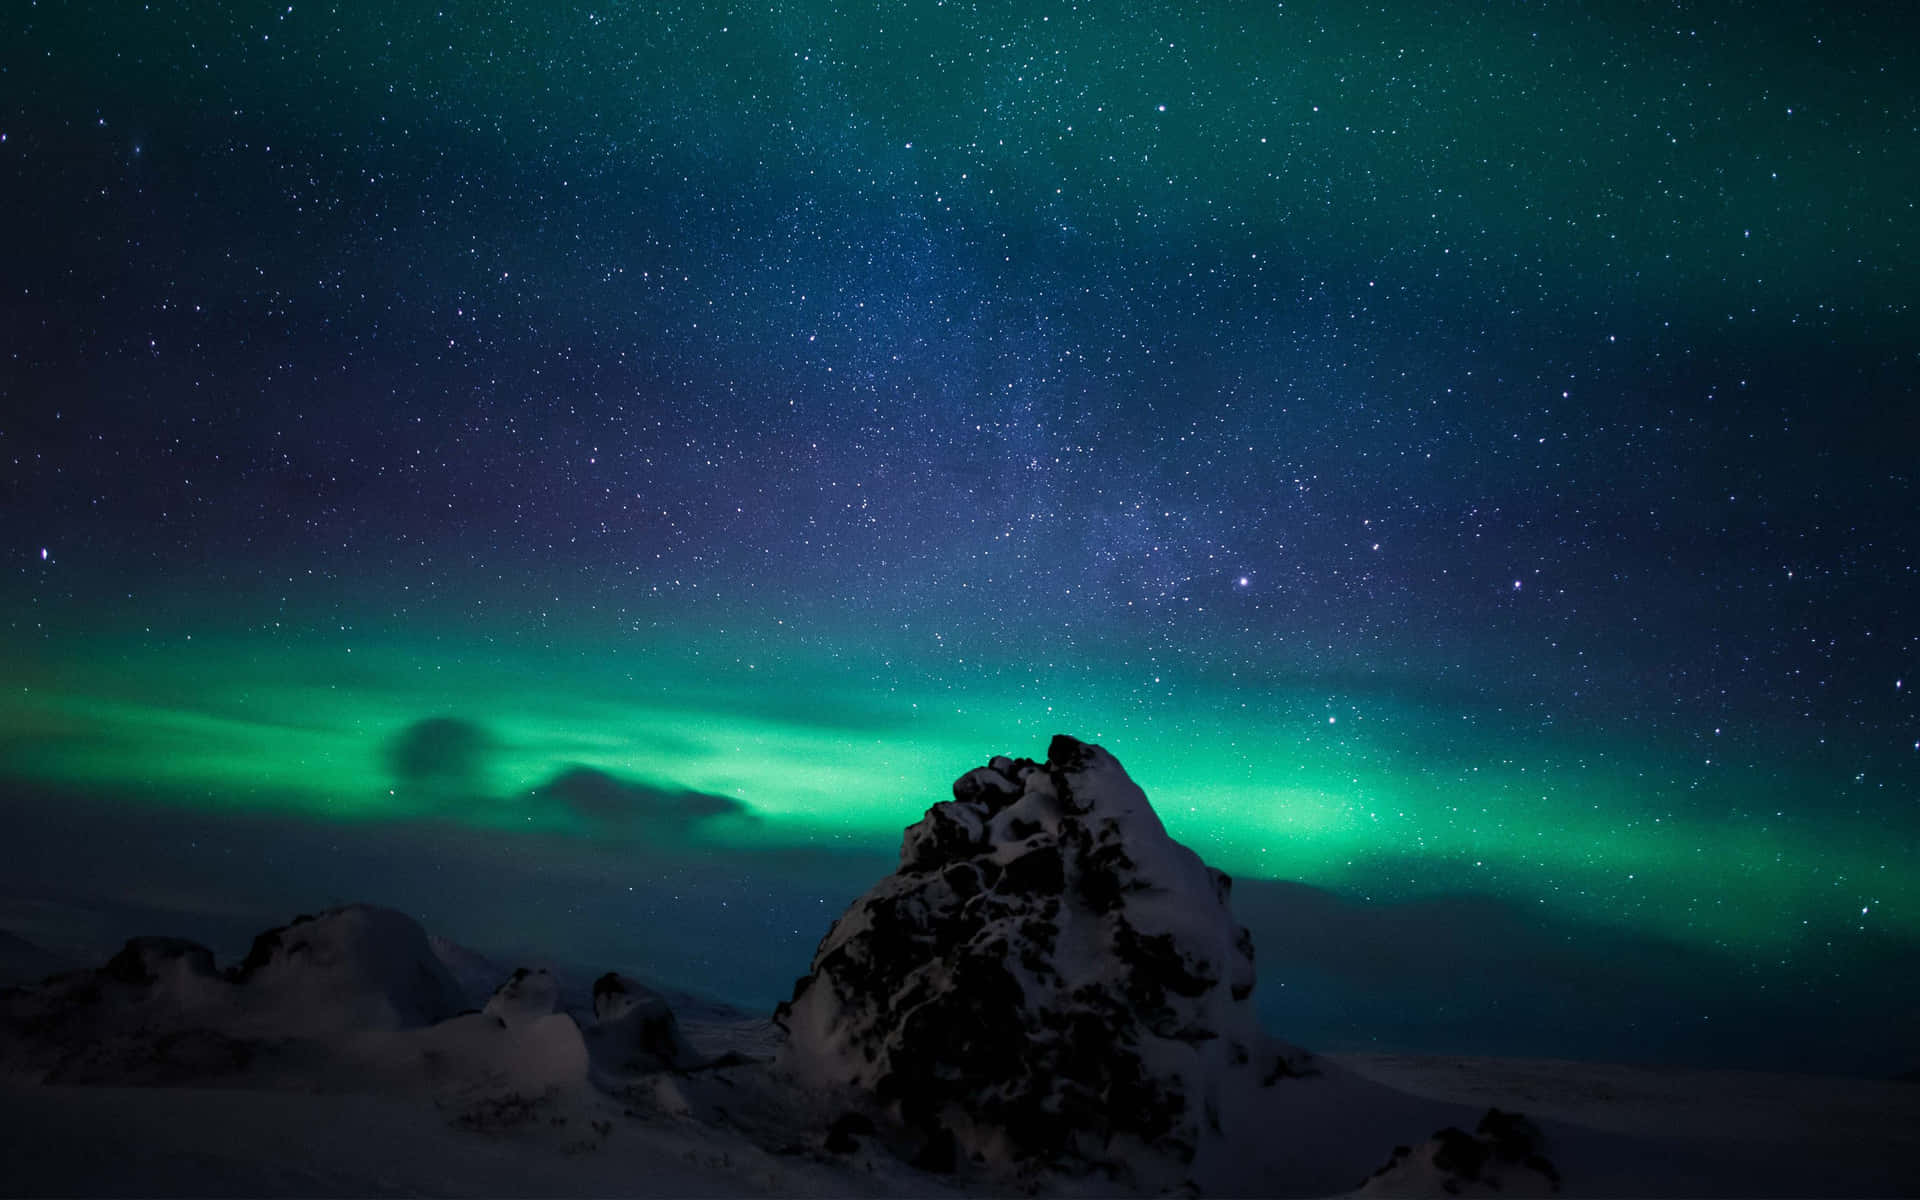 The emergence of an Aurora lights up the night sky